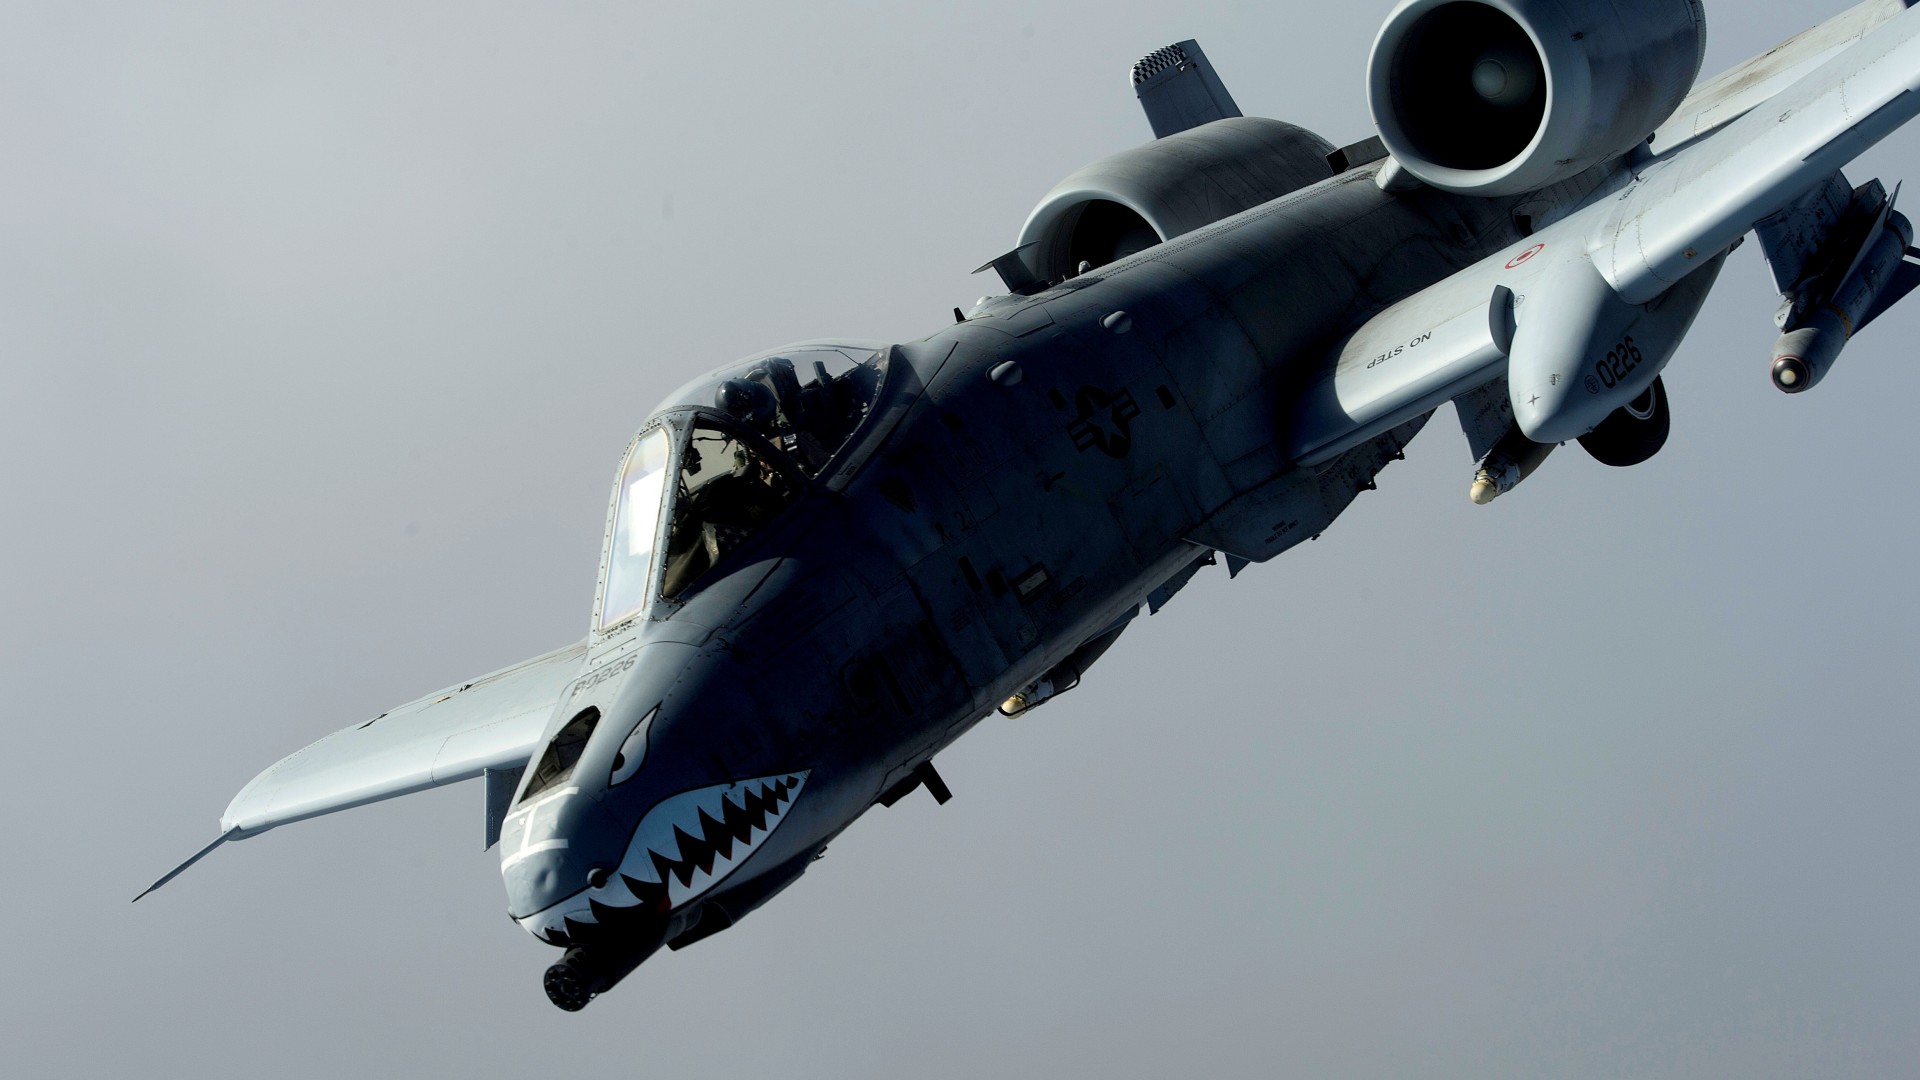 Wallpapers airplane military shark on the desktop